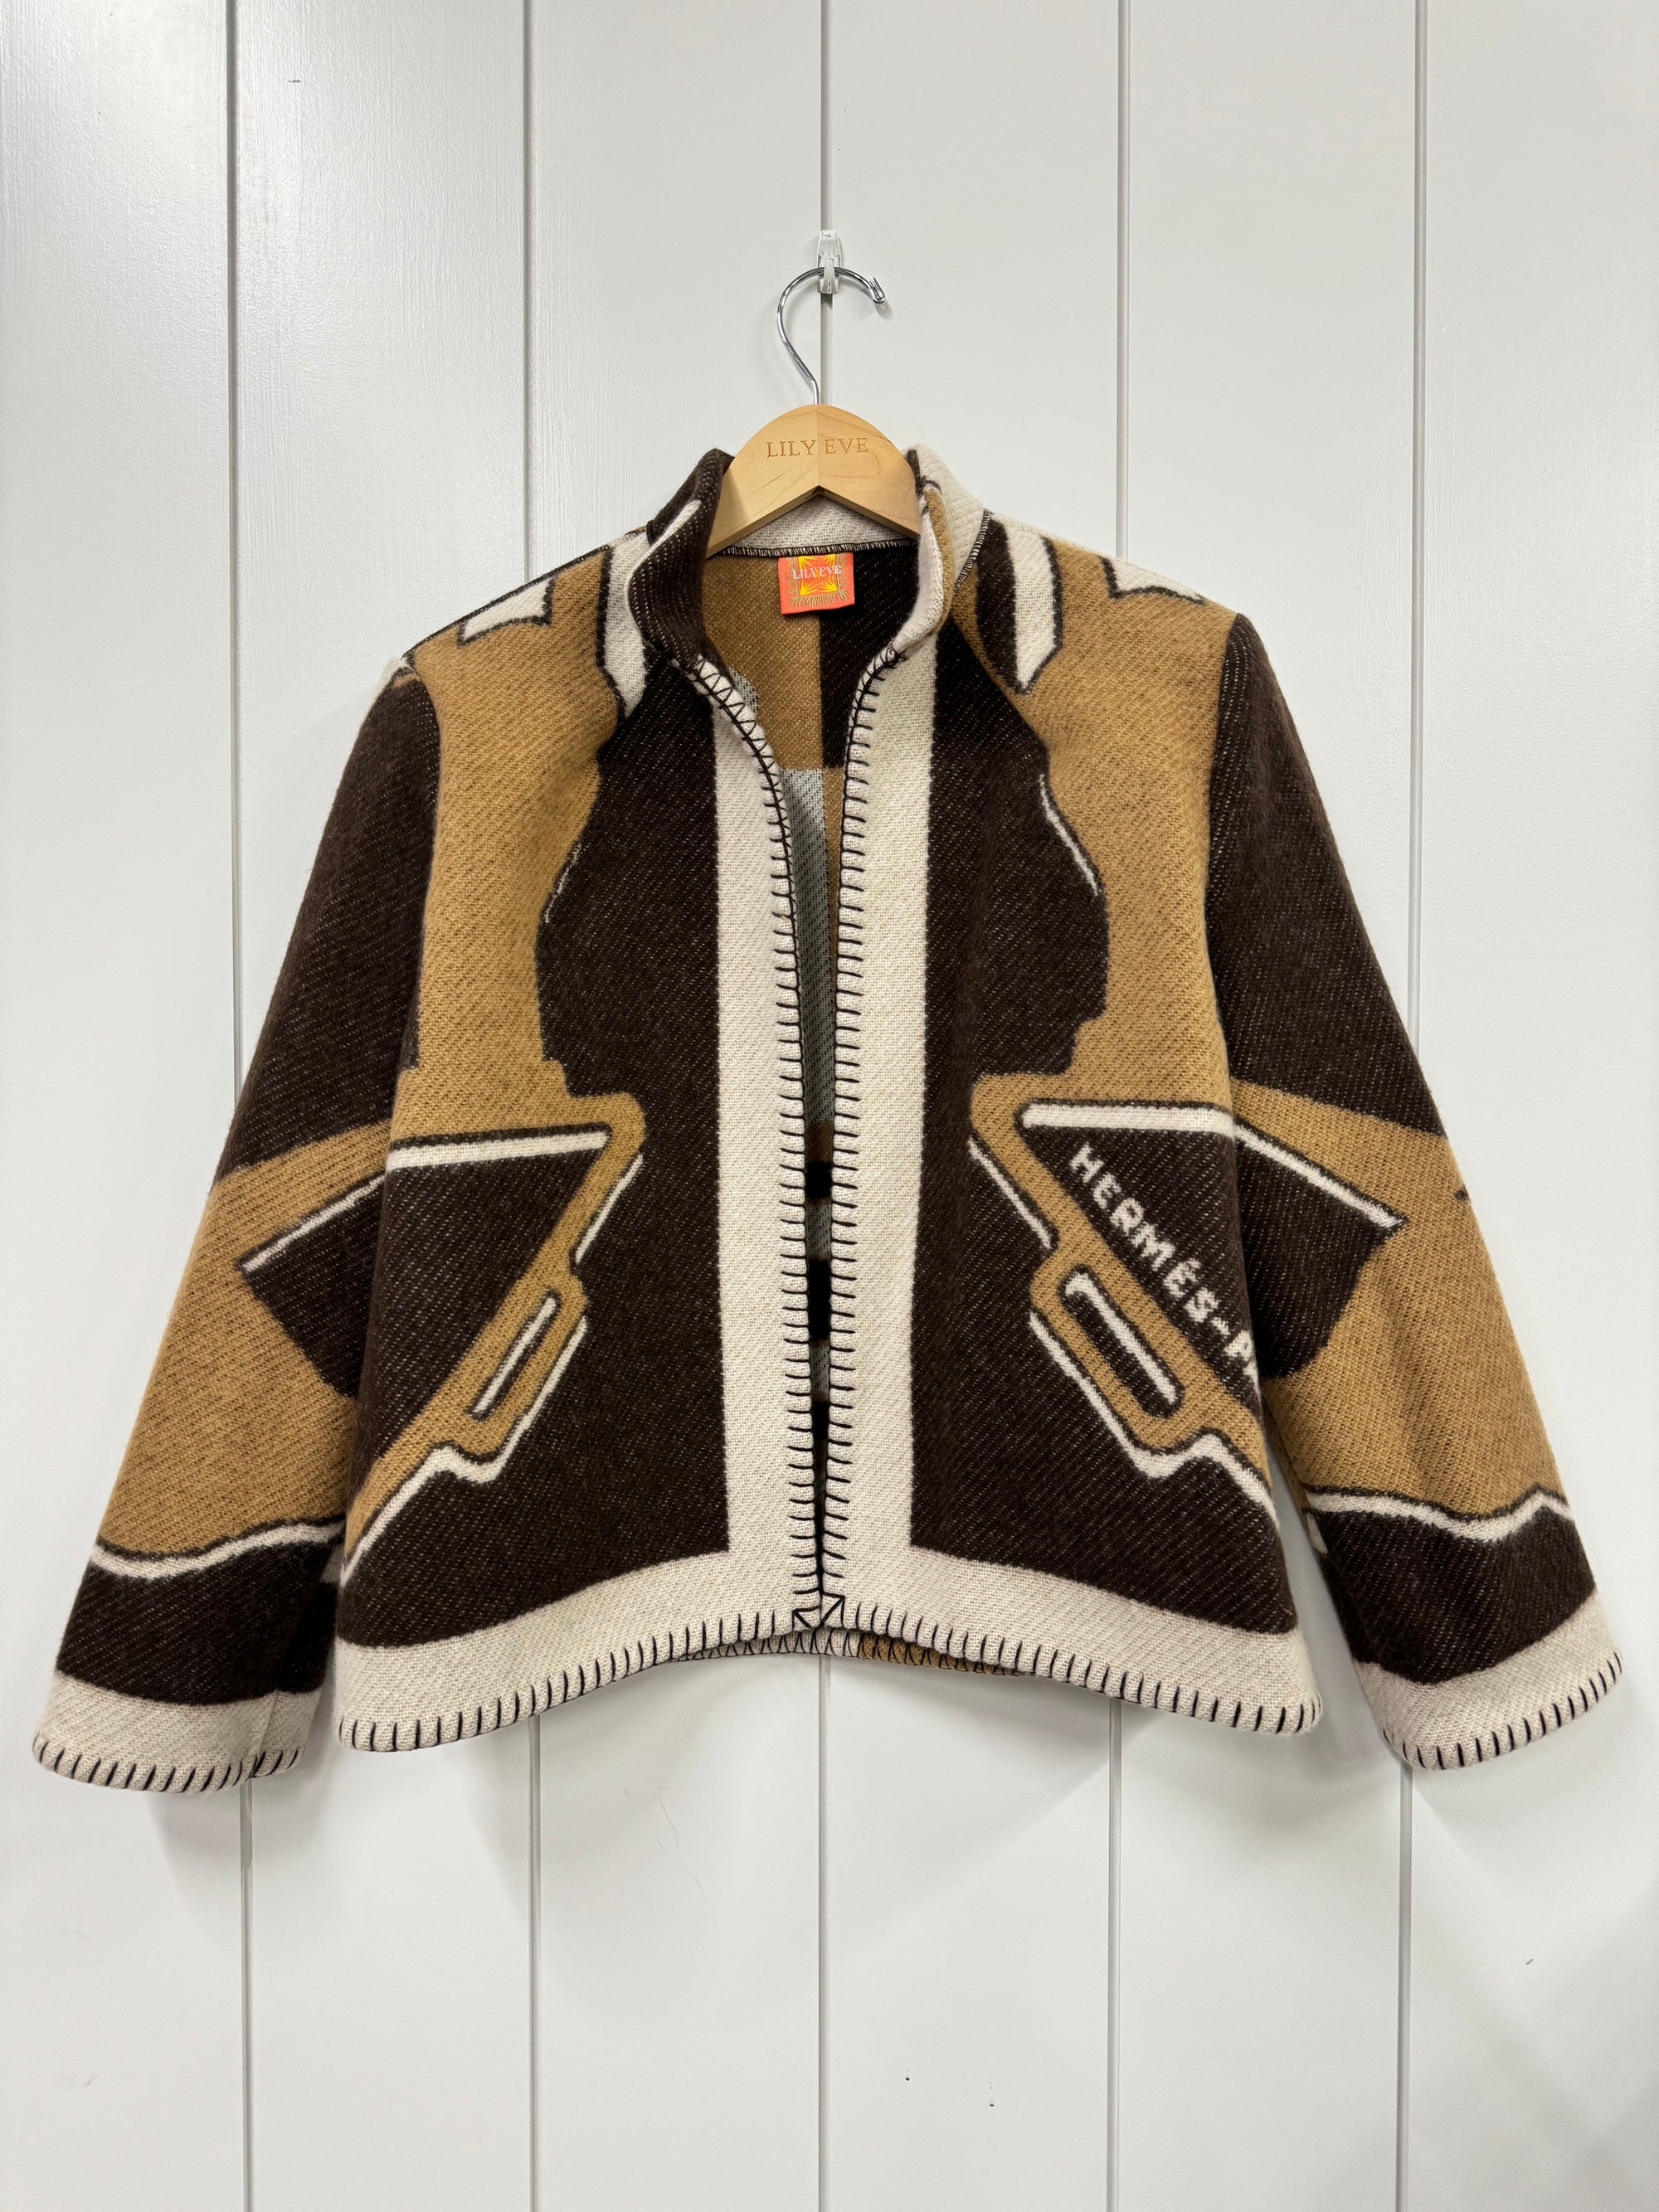 The Brown Buckle Jacket